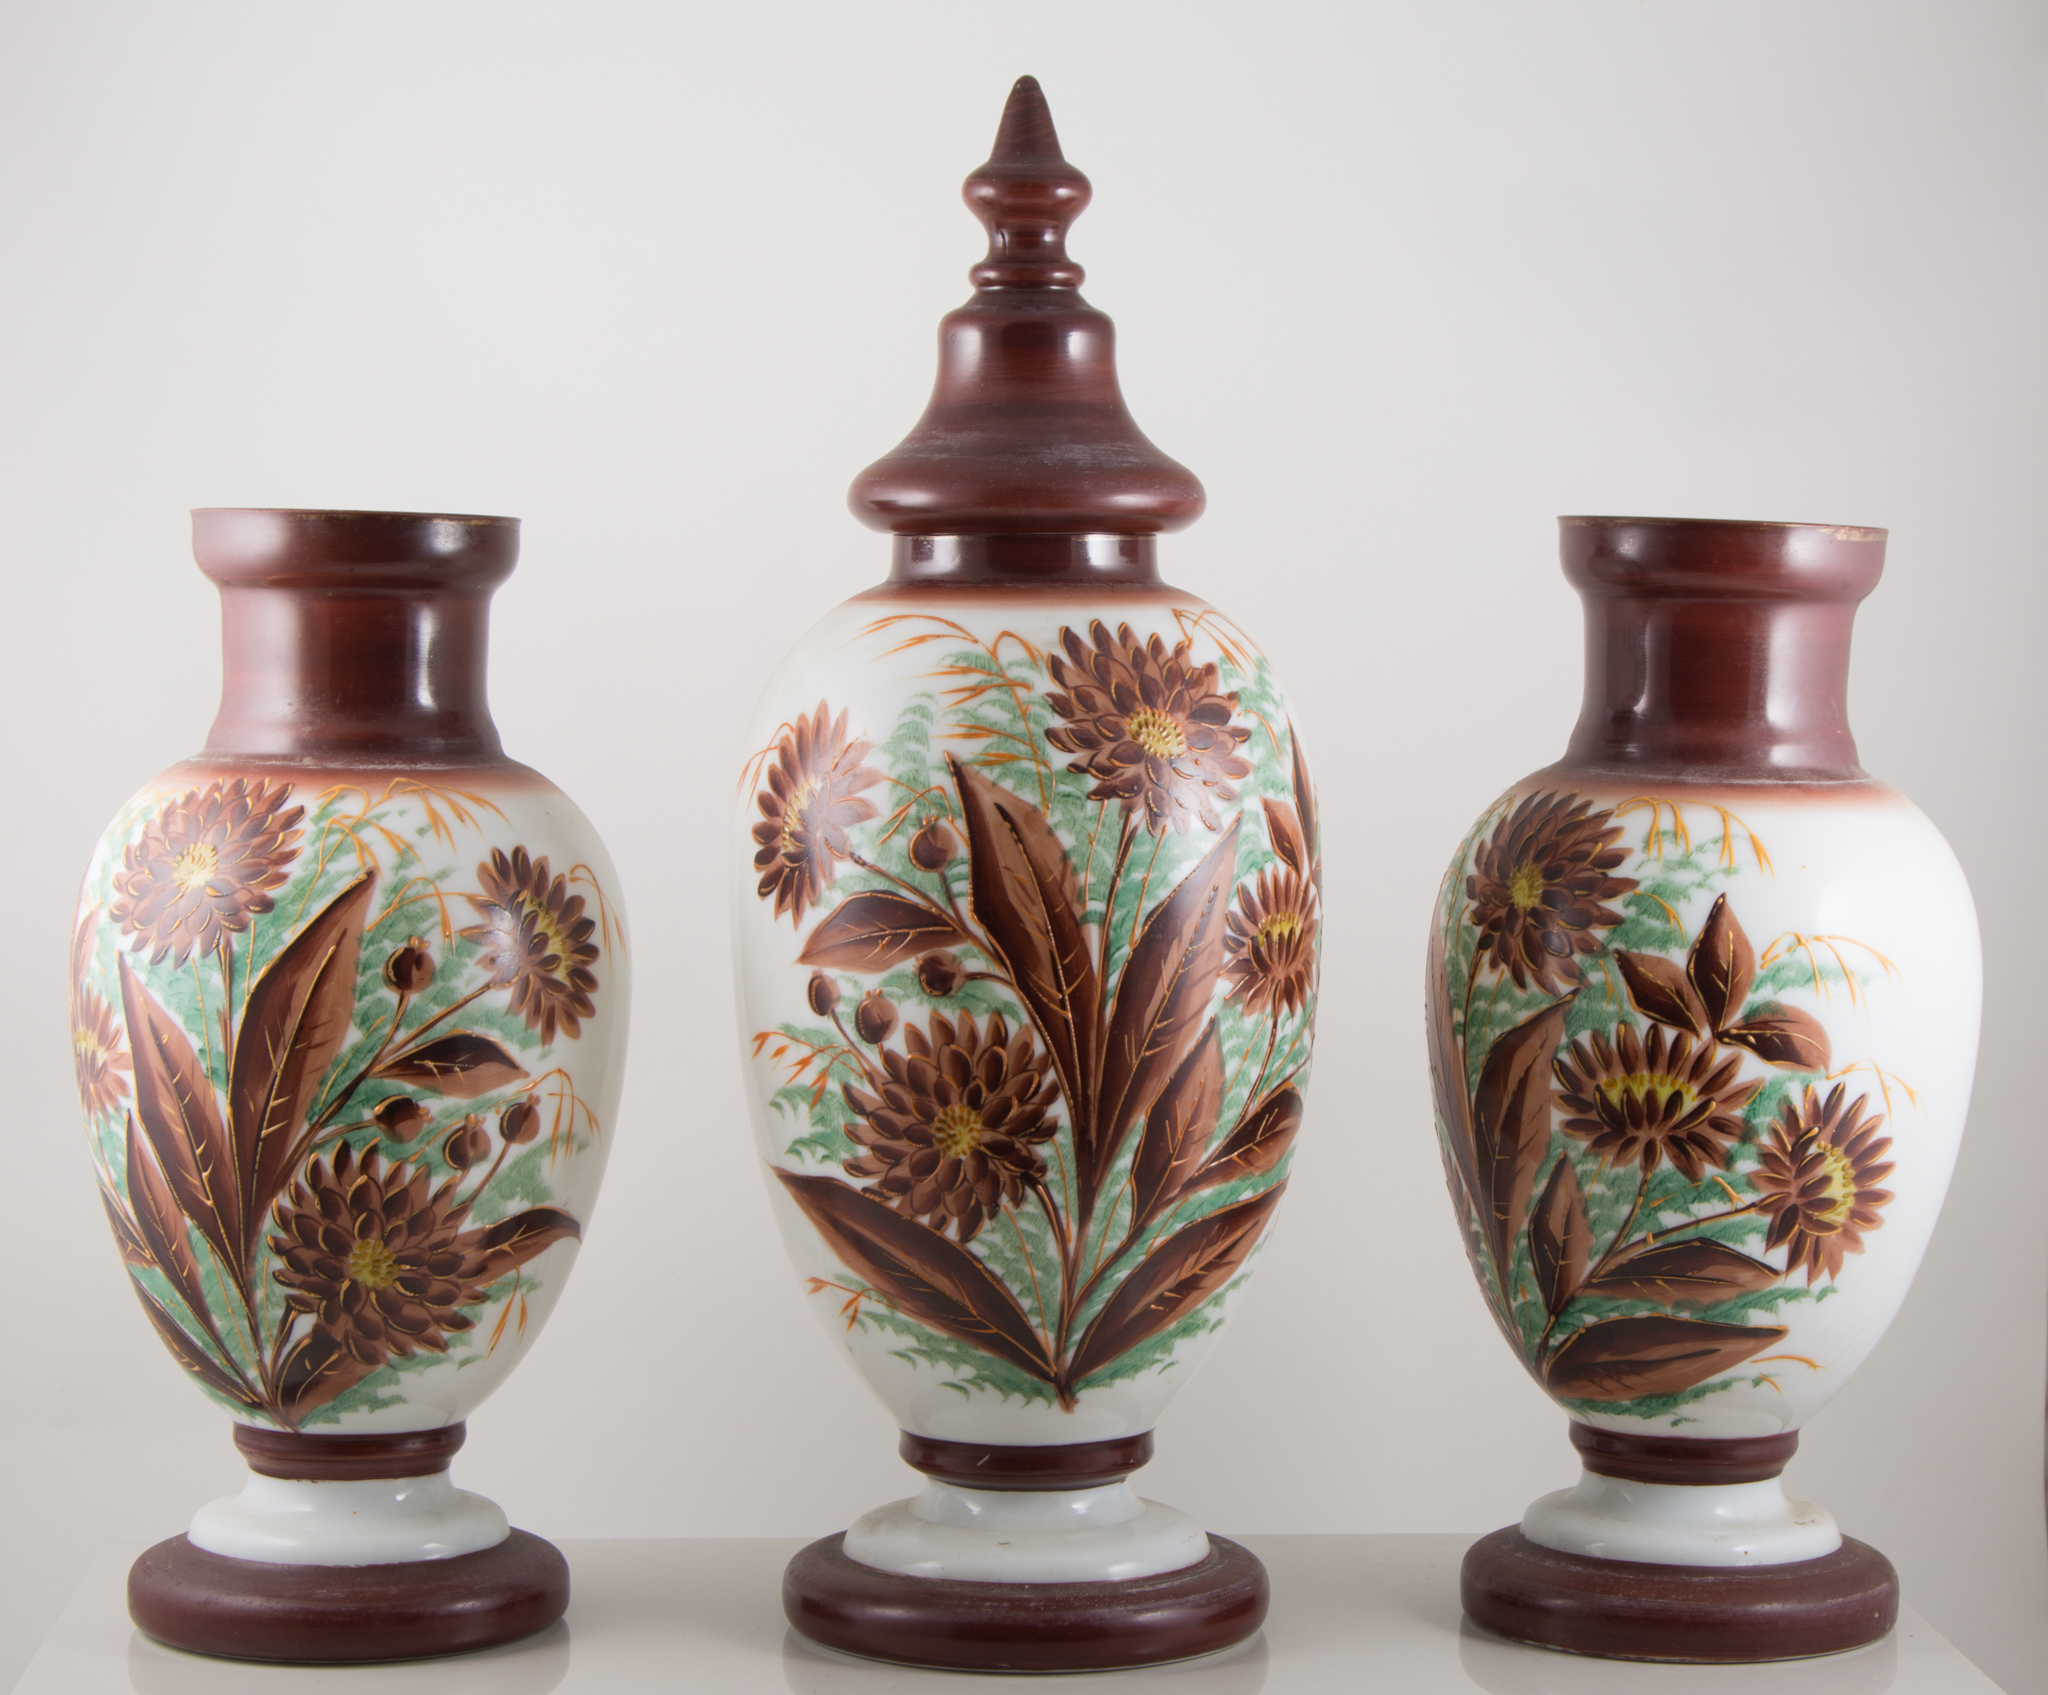 Garniture of three opaque glass vases, late 19th century, ovoid form, one with cover,